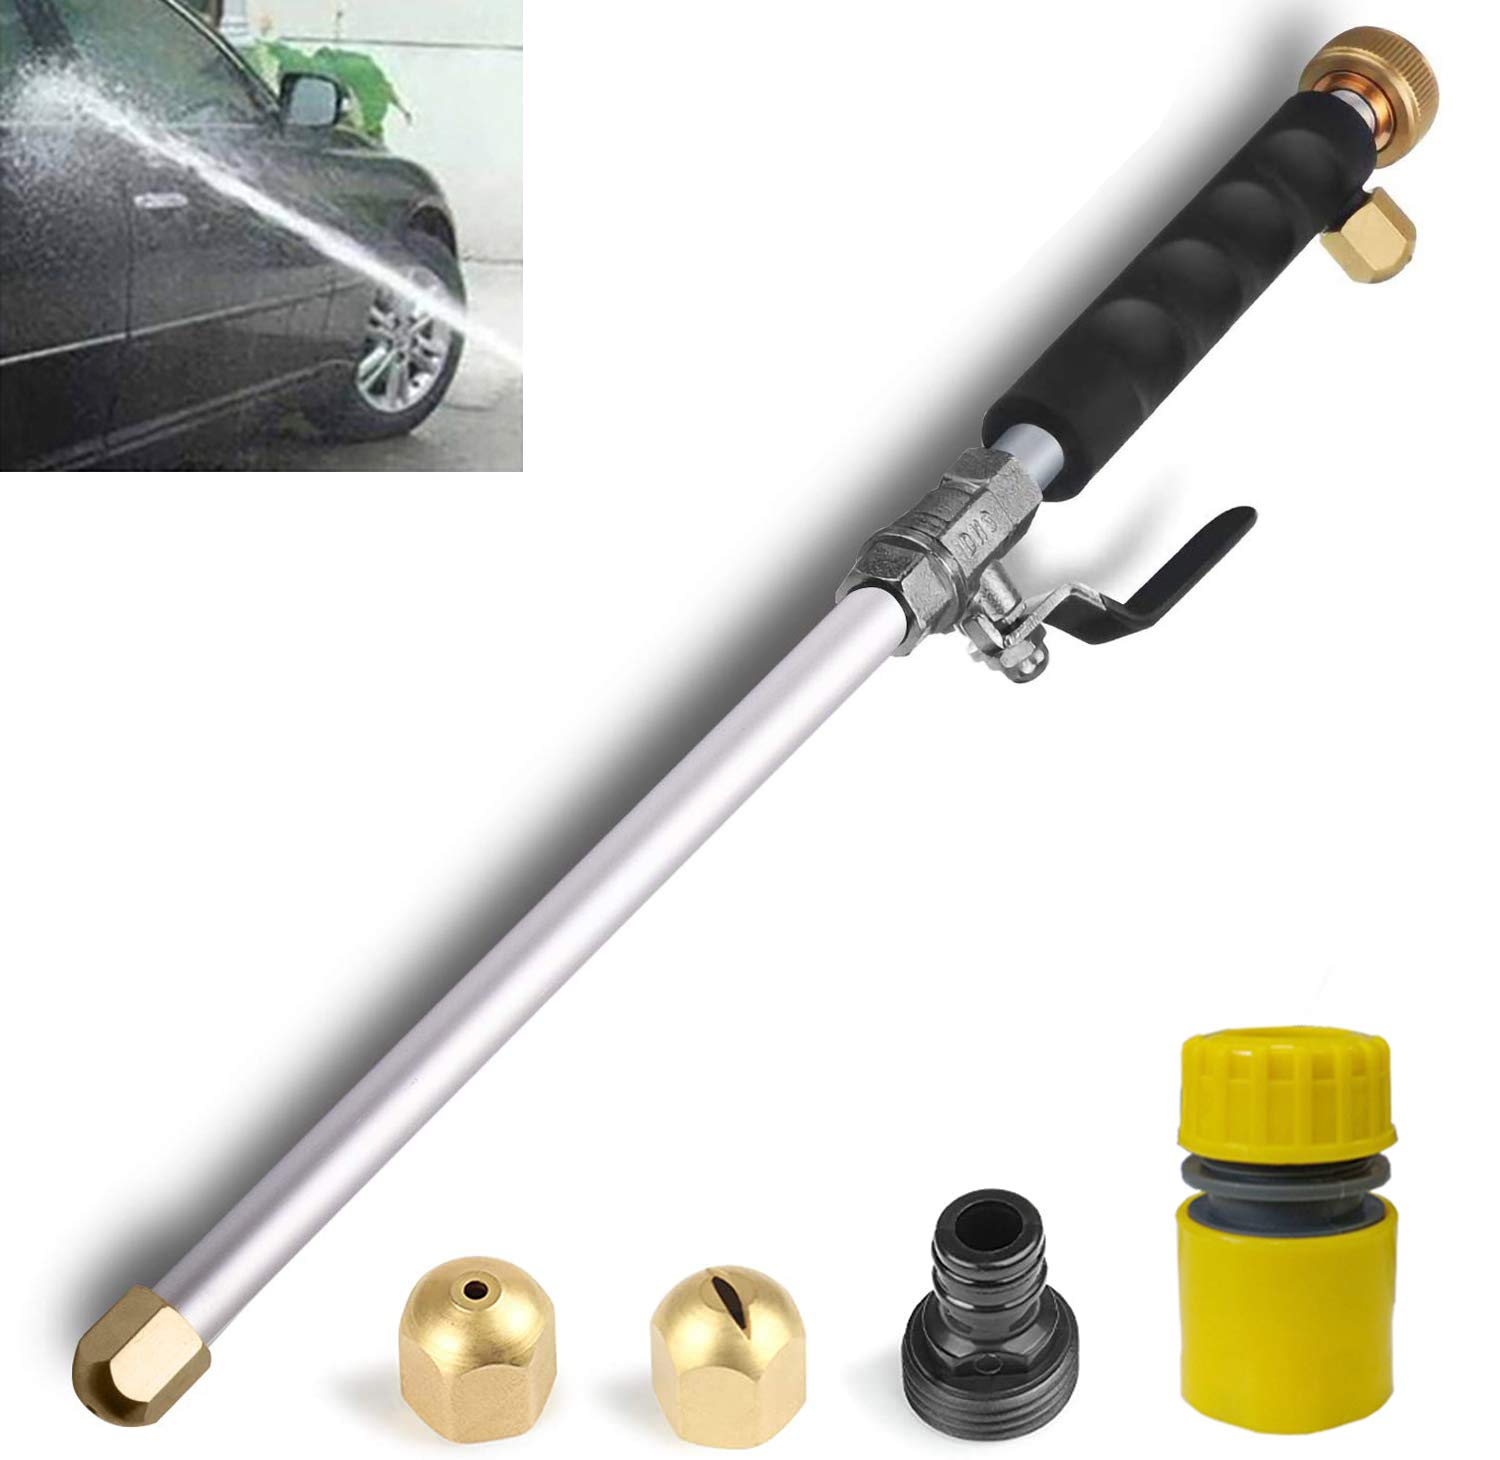 BBear Stainless Steel Power Washer Attachment For Garden Hose